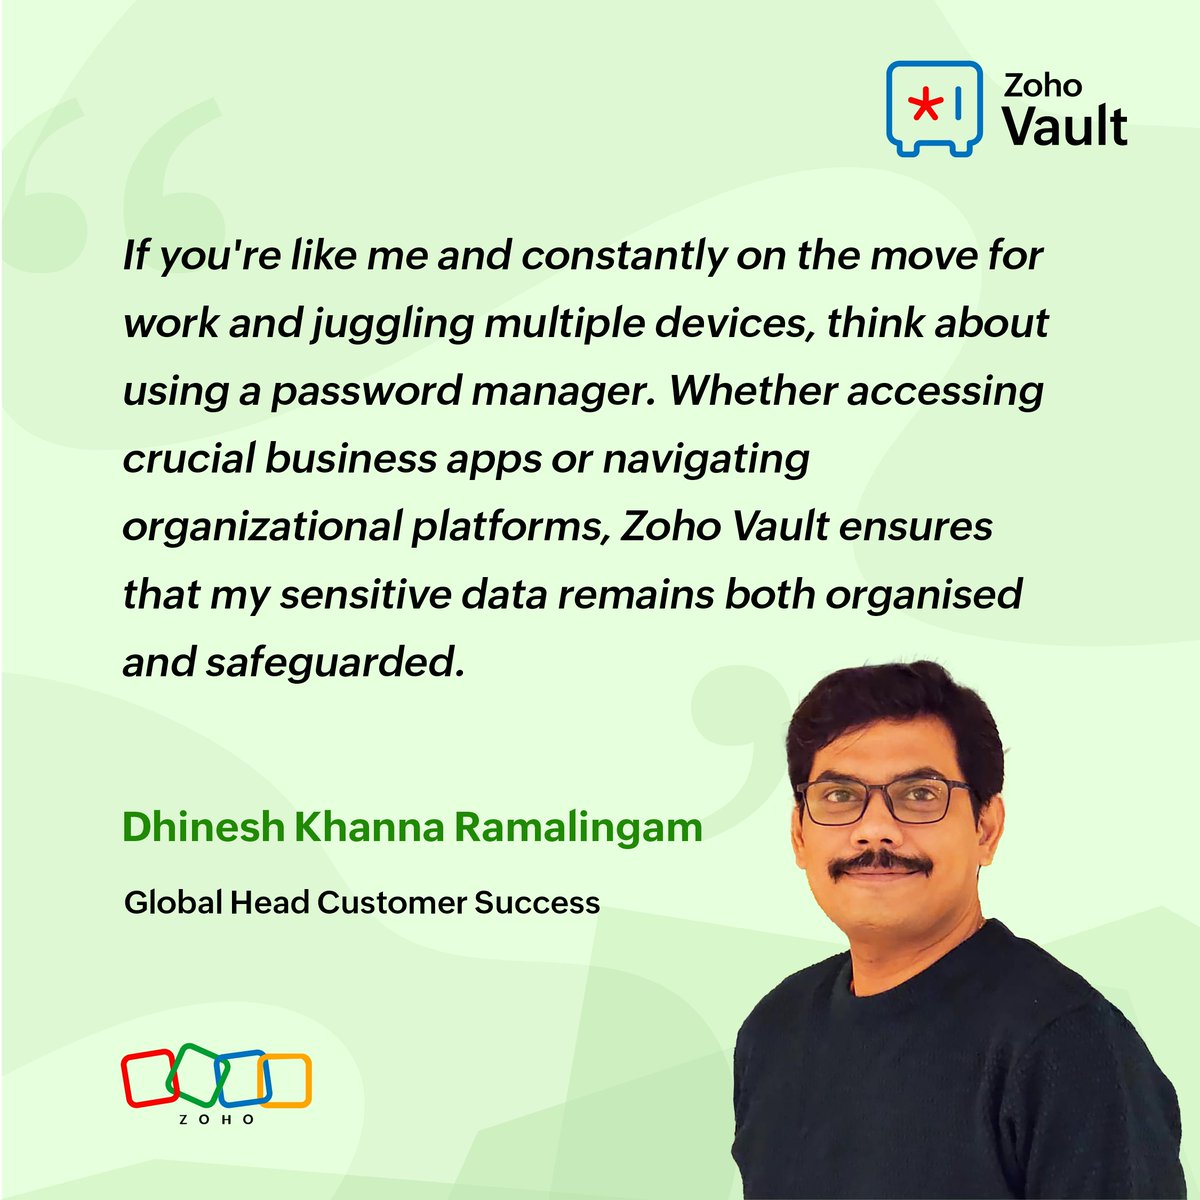 Password security tip of the day from @dhinesh_khanna, Global Head Customer Success, @Zoho. 😀

#WorldPasswordDay #StaySafeOnline